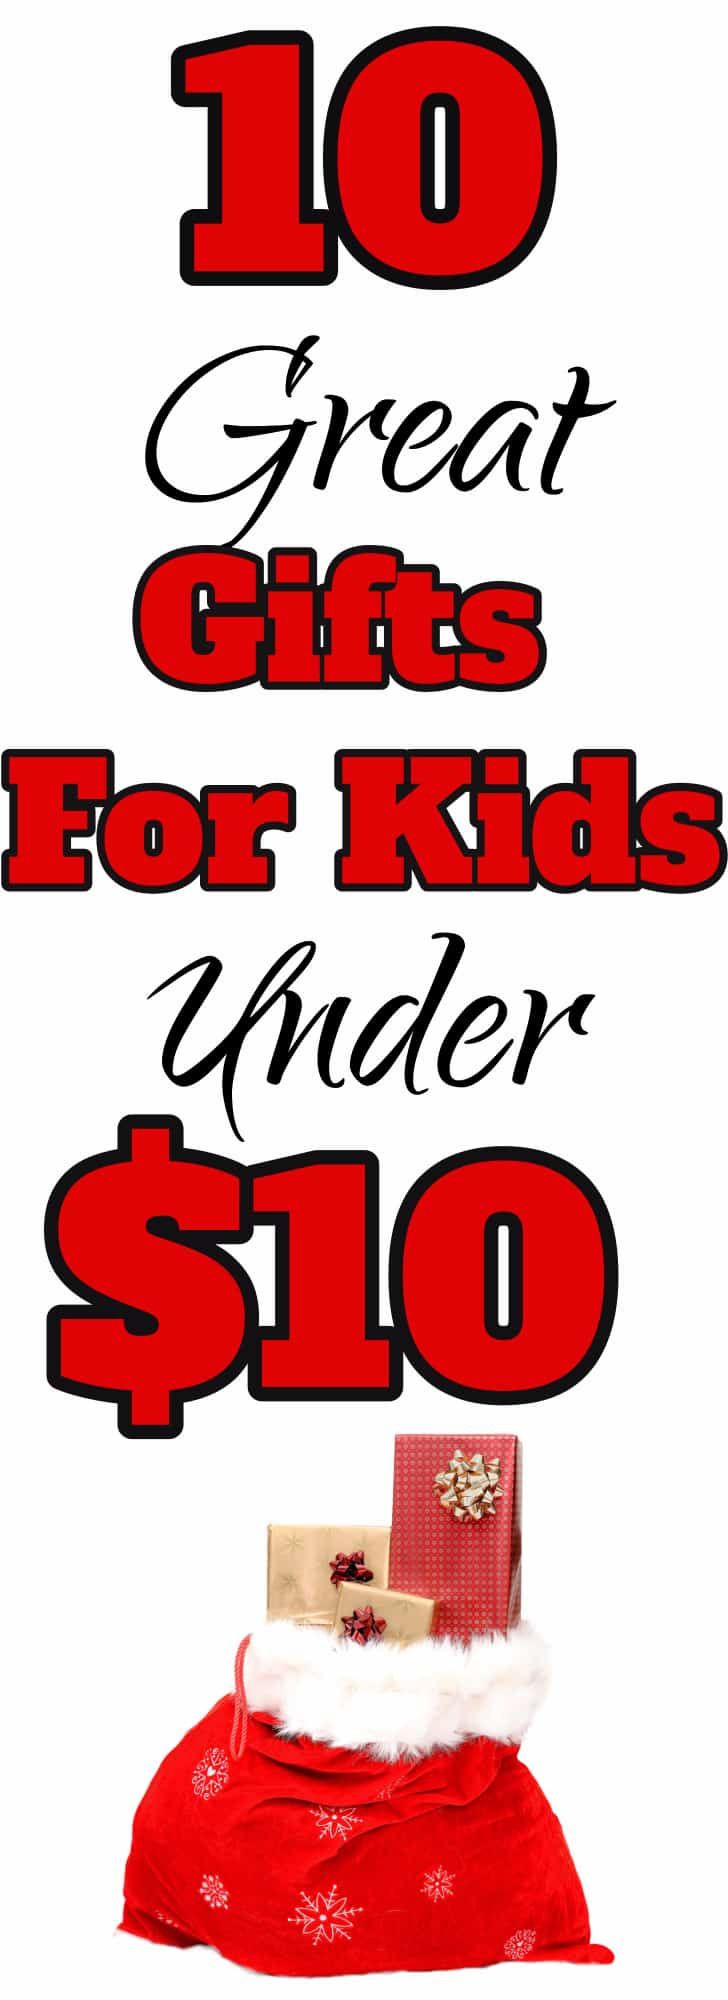 Christmas Gift Ideas Under $10
 Need some great kids ts under $10